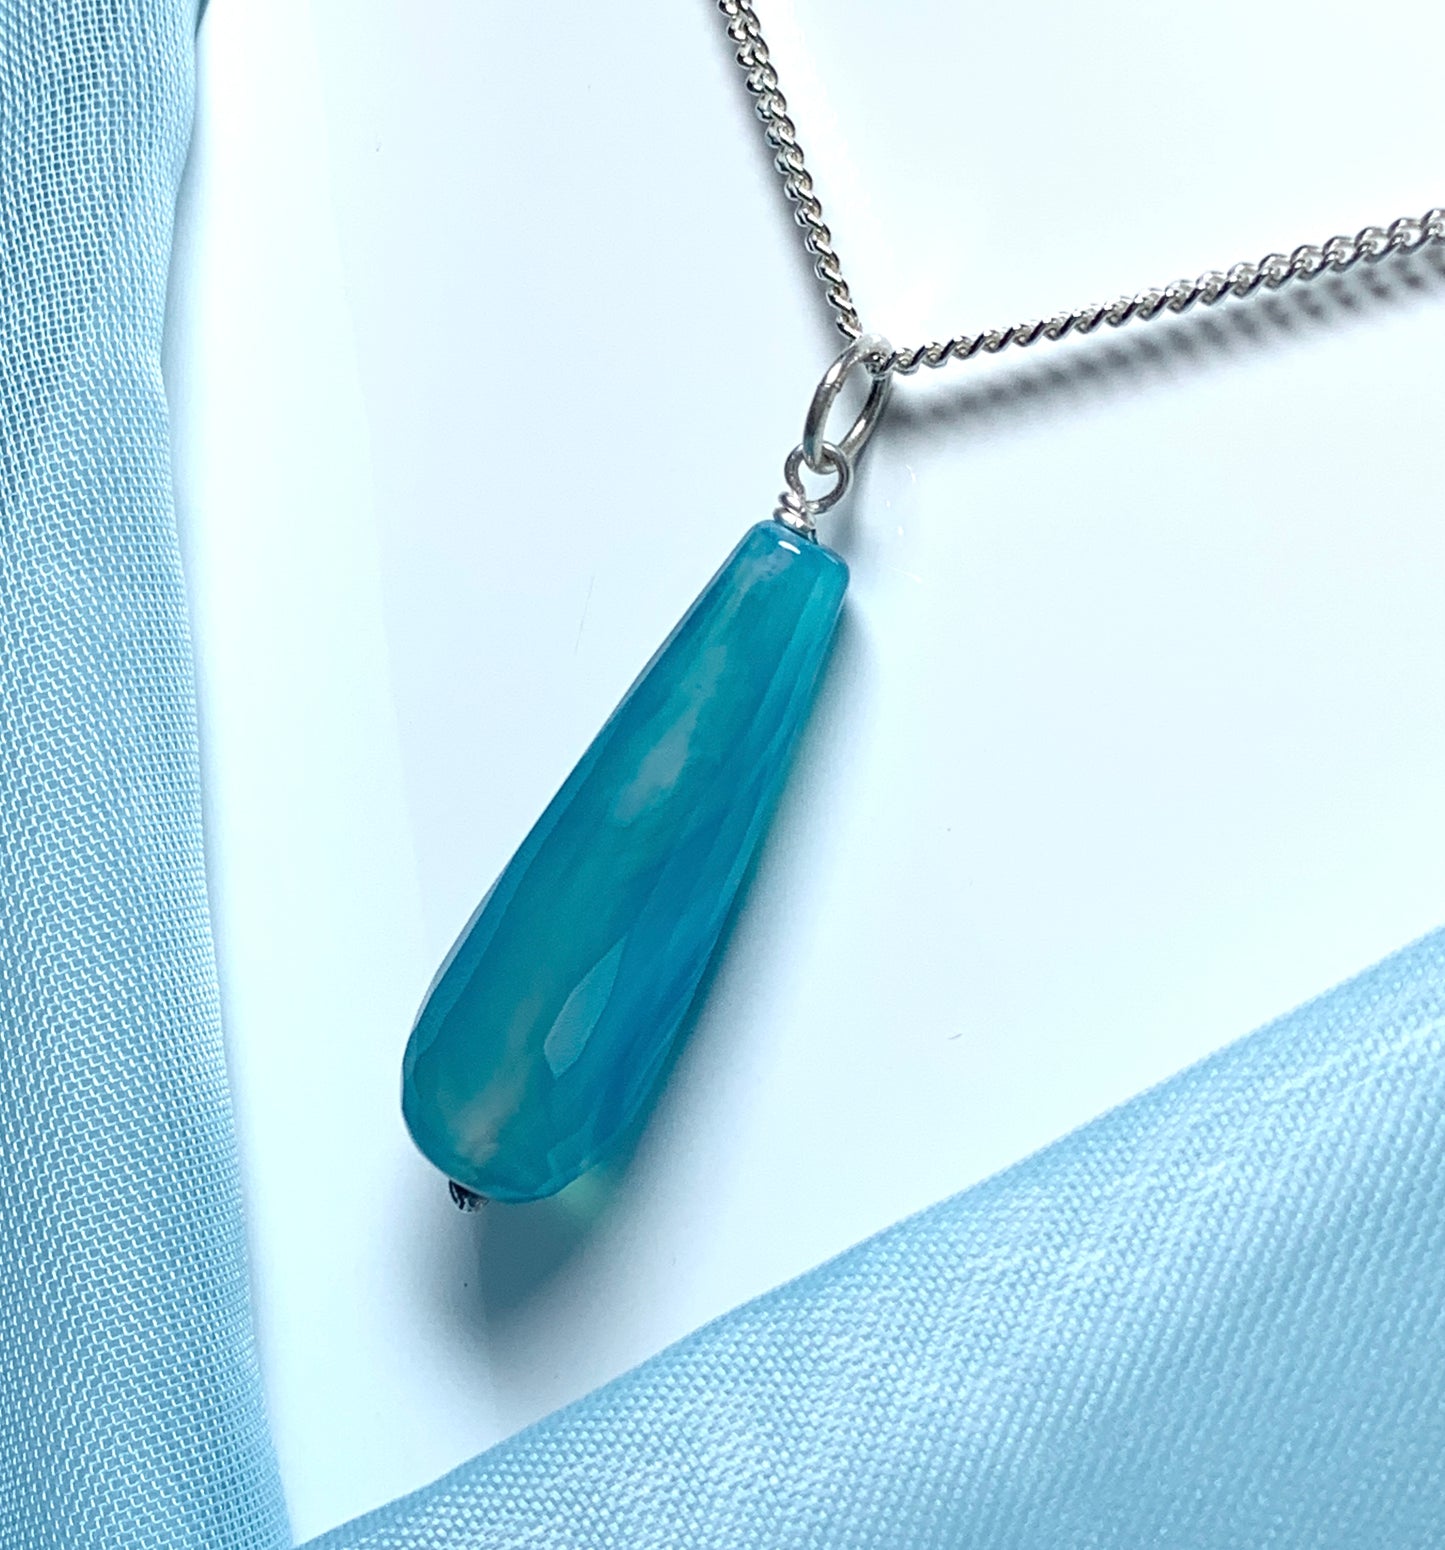 Blue agate shaped teardrop necklace pendent sterling silver bomber